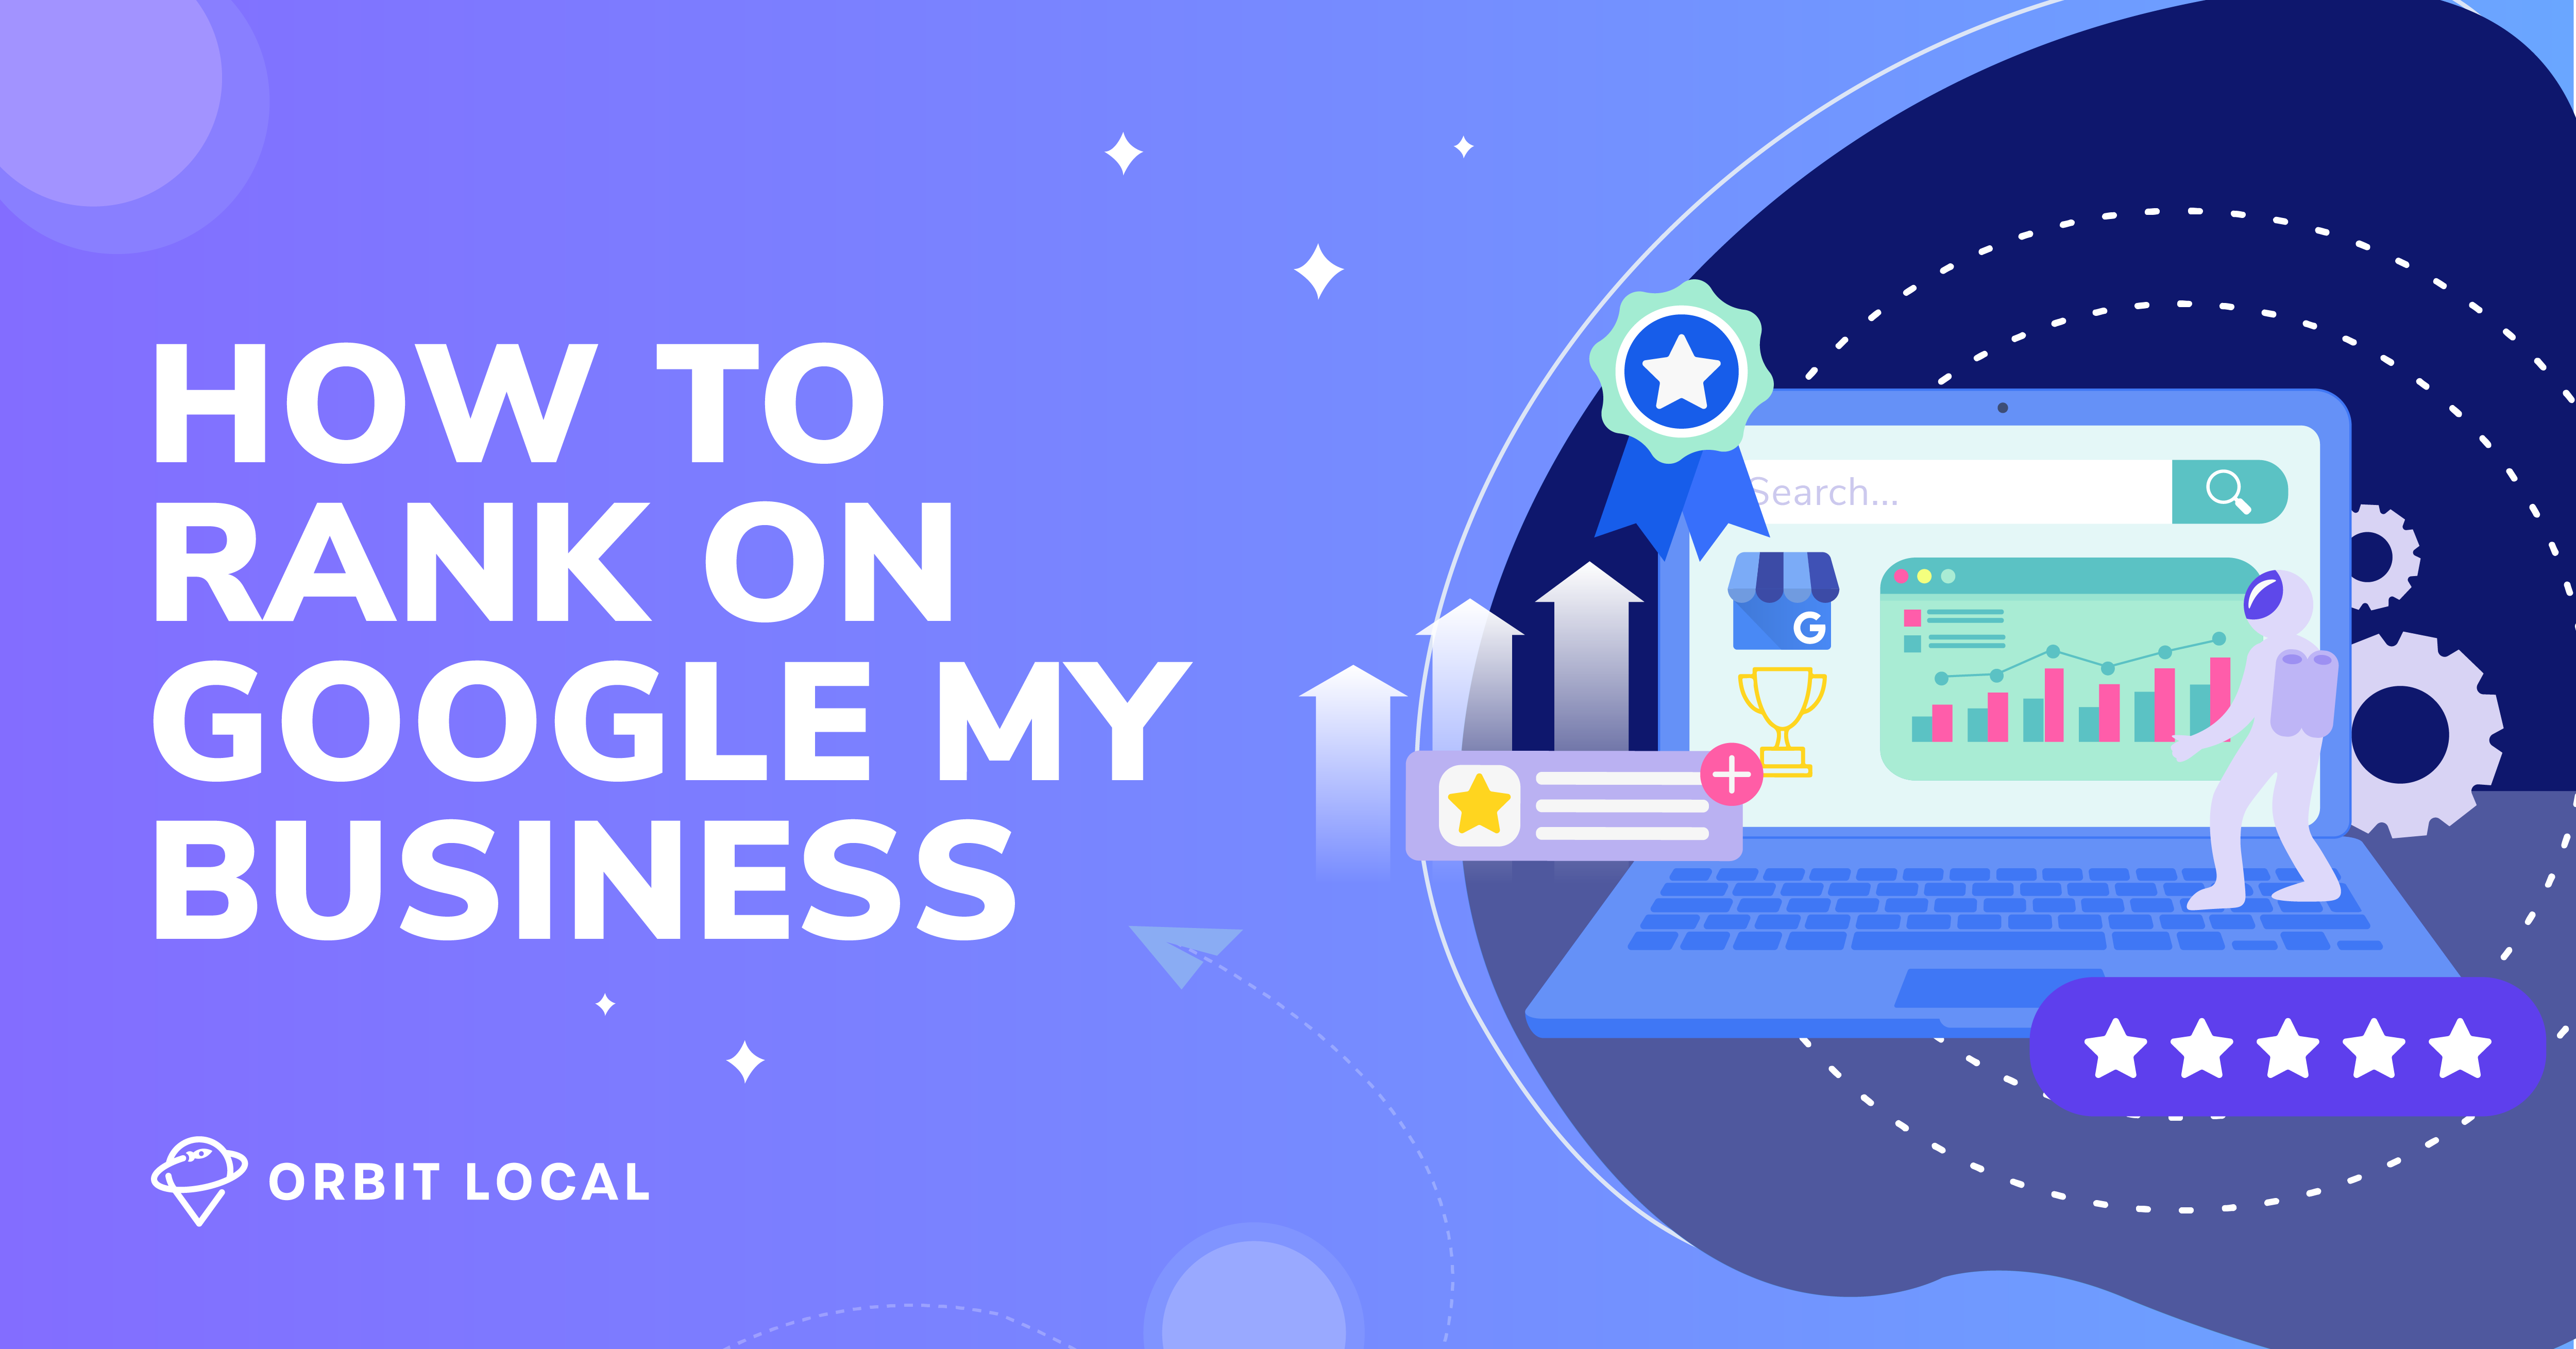 how to rank on google my business 2